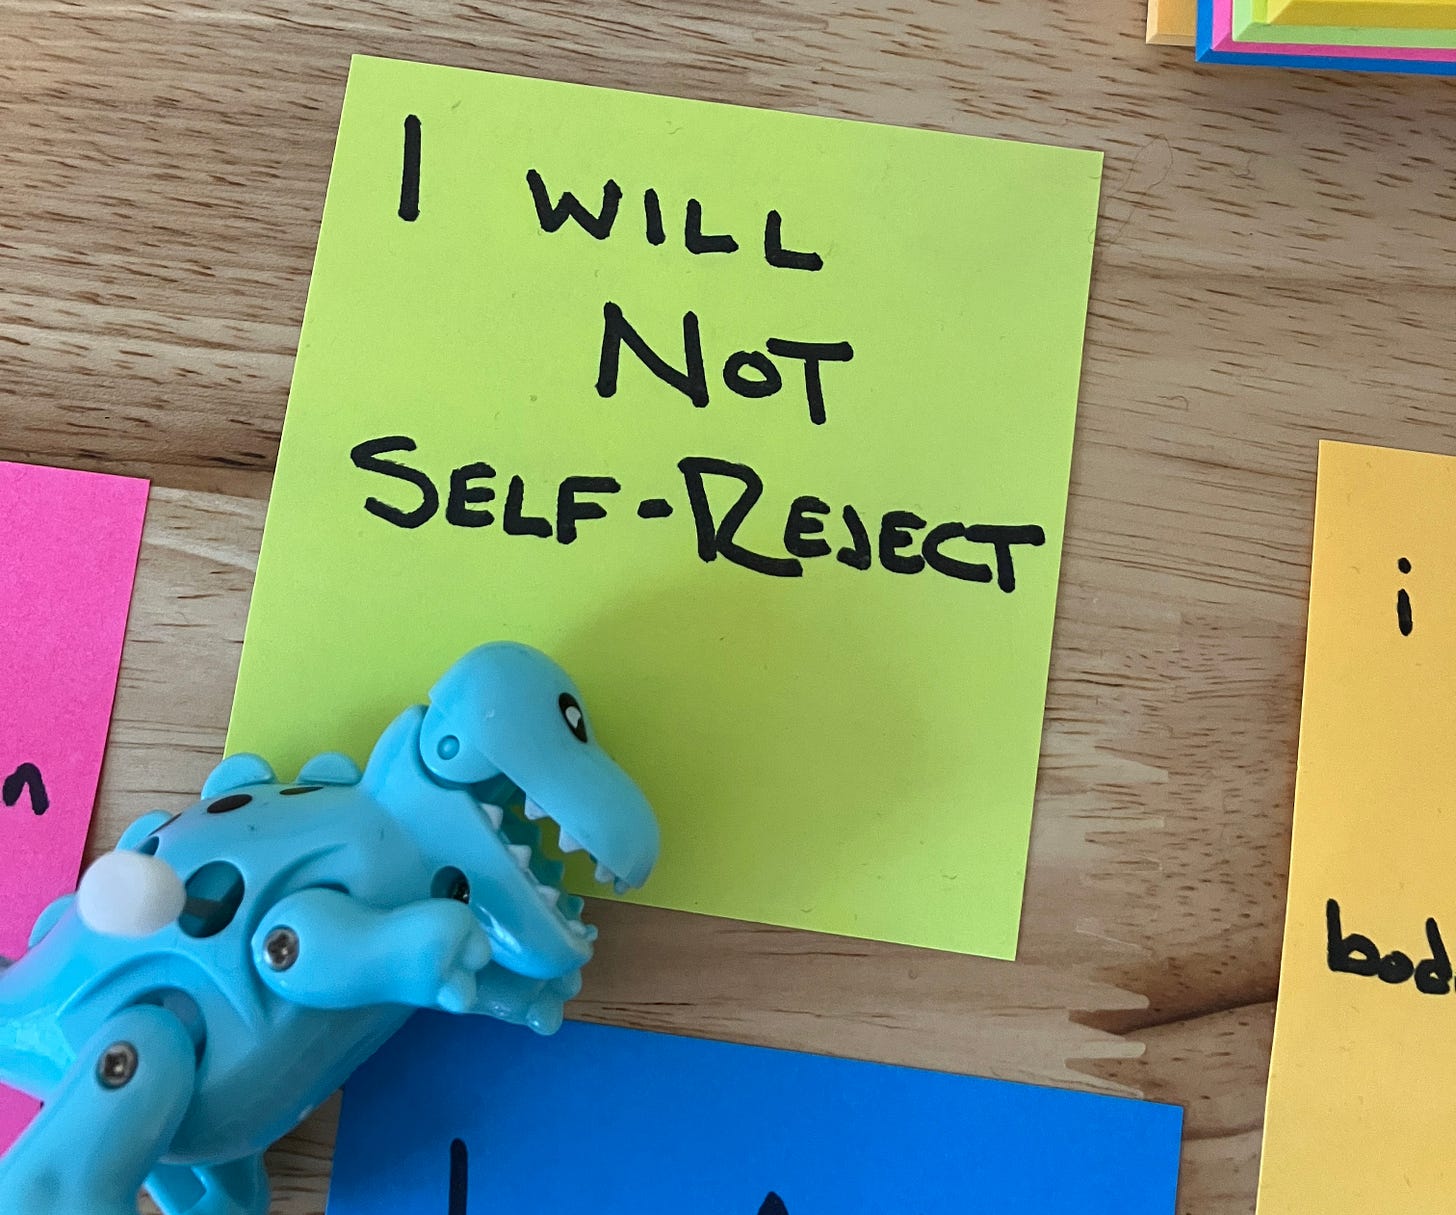 A green sticky note that reads "I will not self-reject". A small wind up dinosaur toy in the foreground